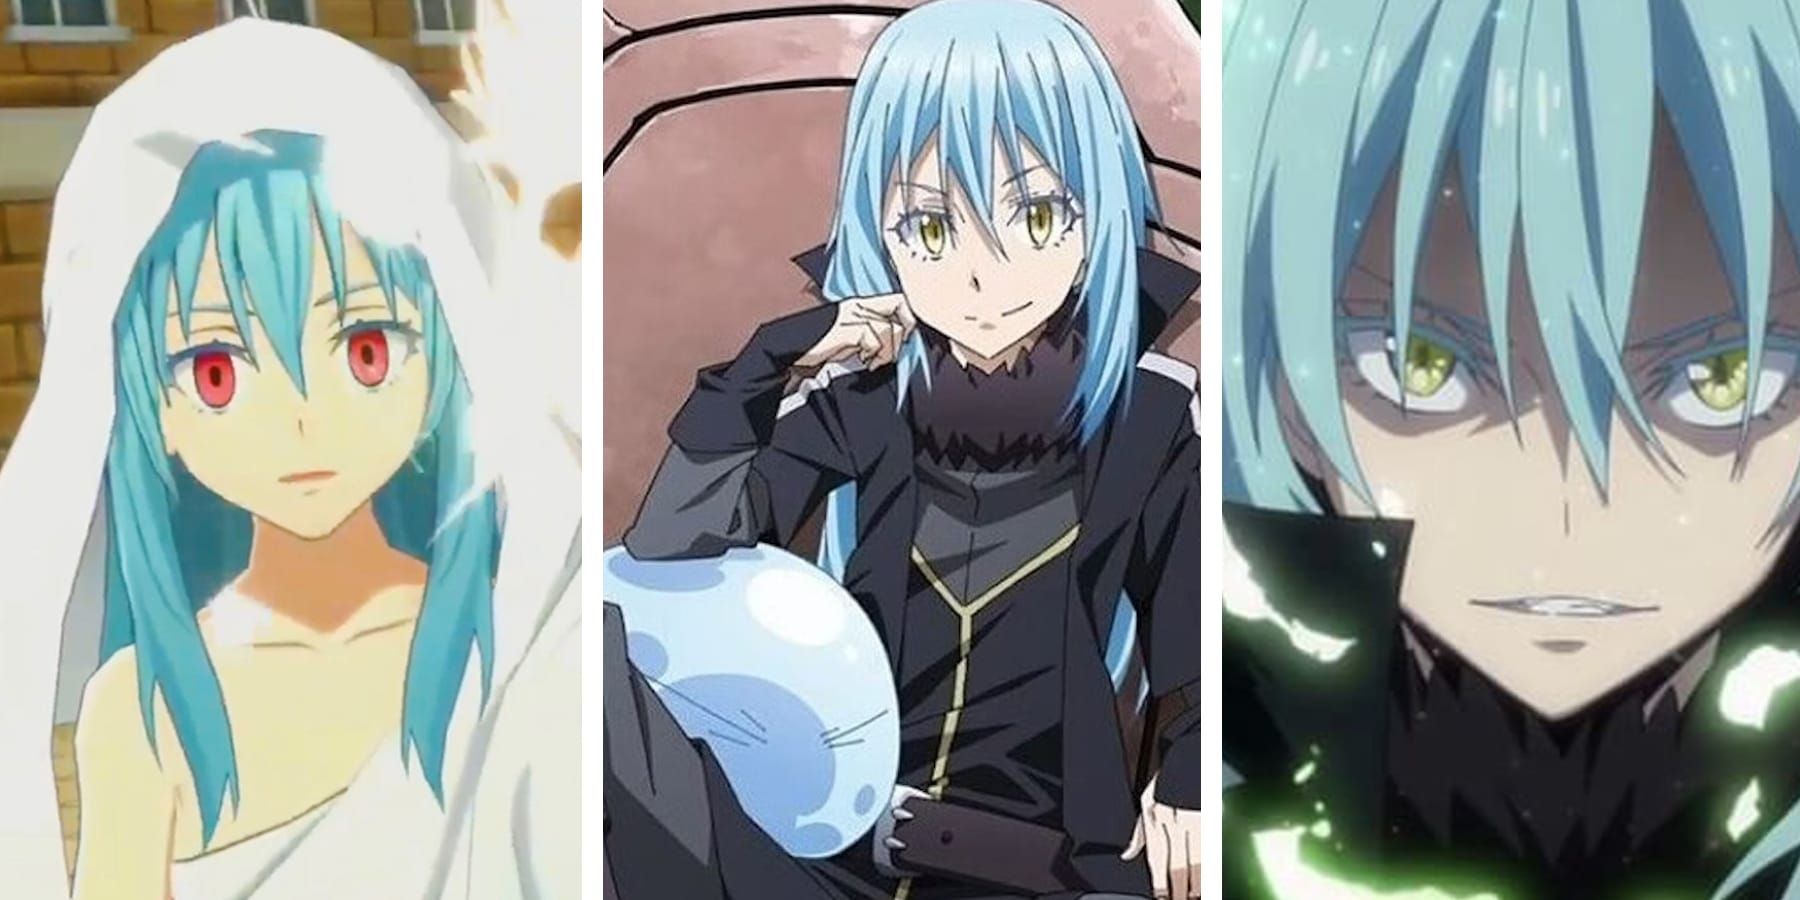 A split image of Rimuru in That Time I Got Reincarnated as a Slime